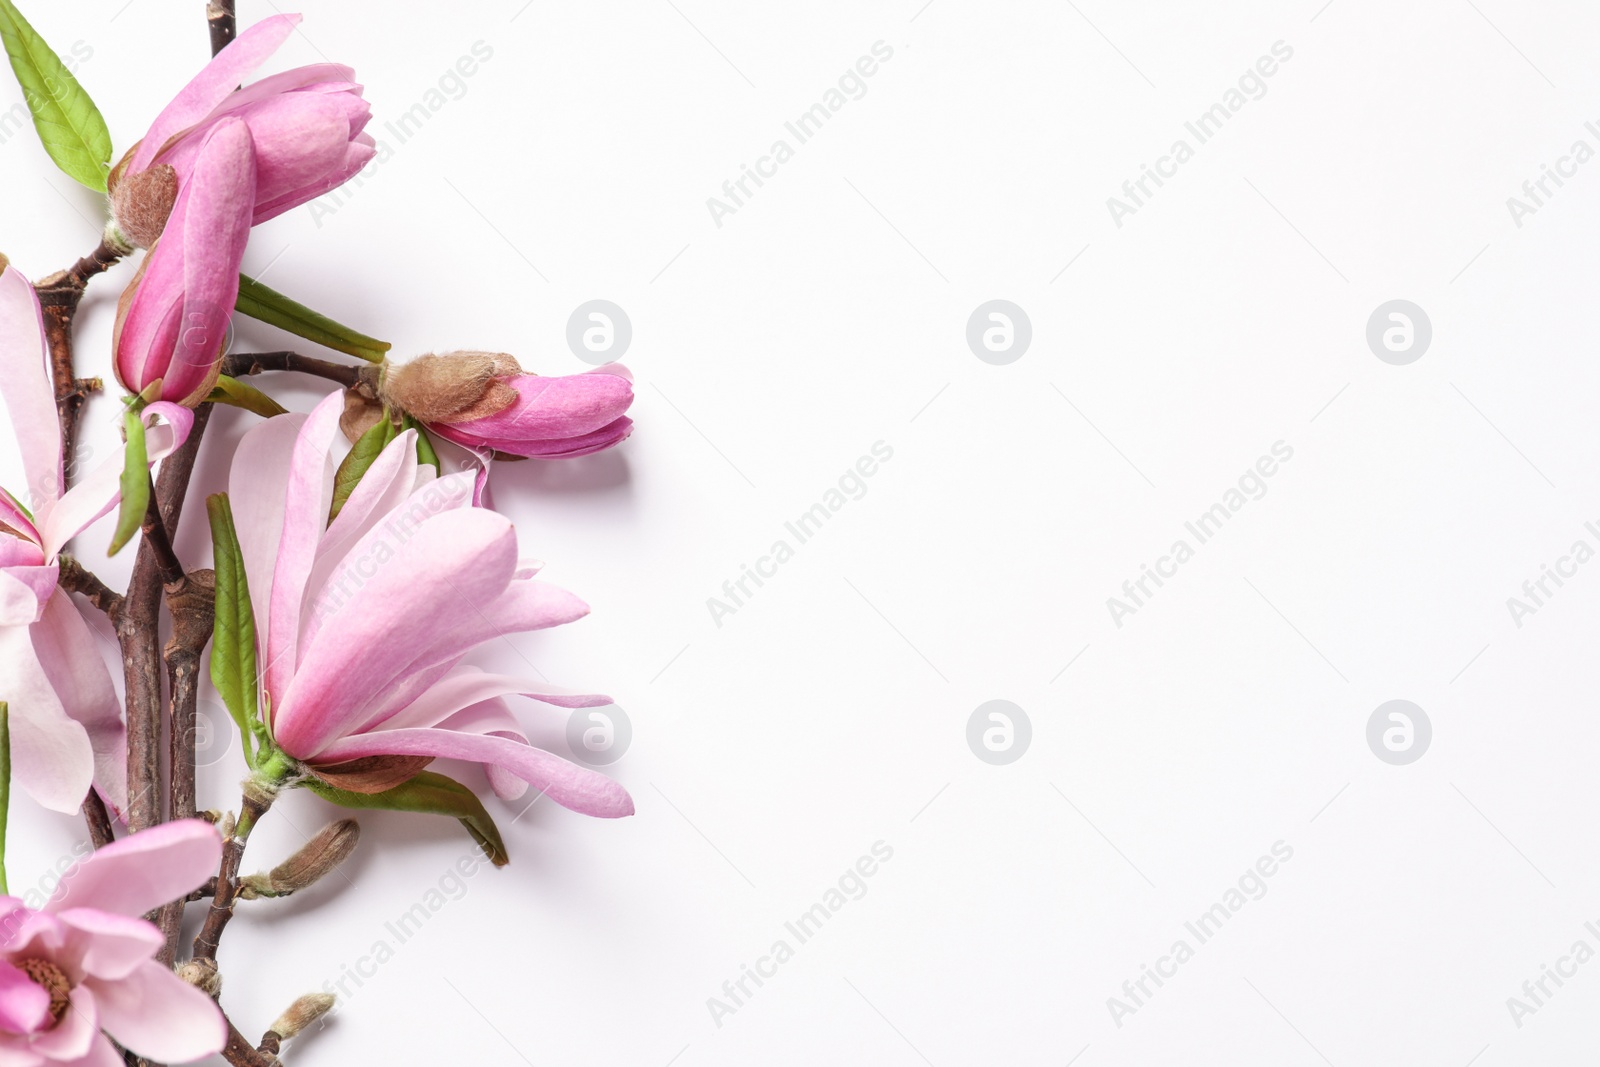 Photo of Magnolia tree branches with beautiful flowers on white background, top view